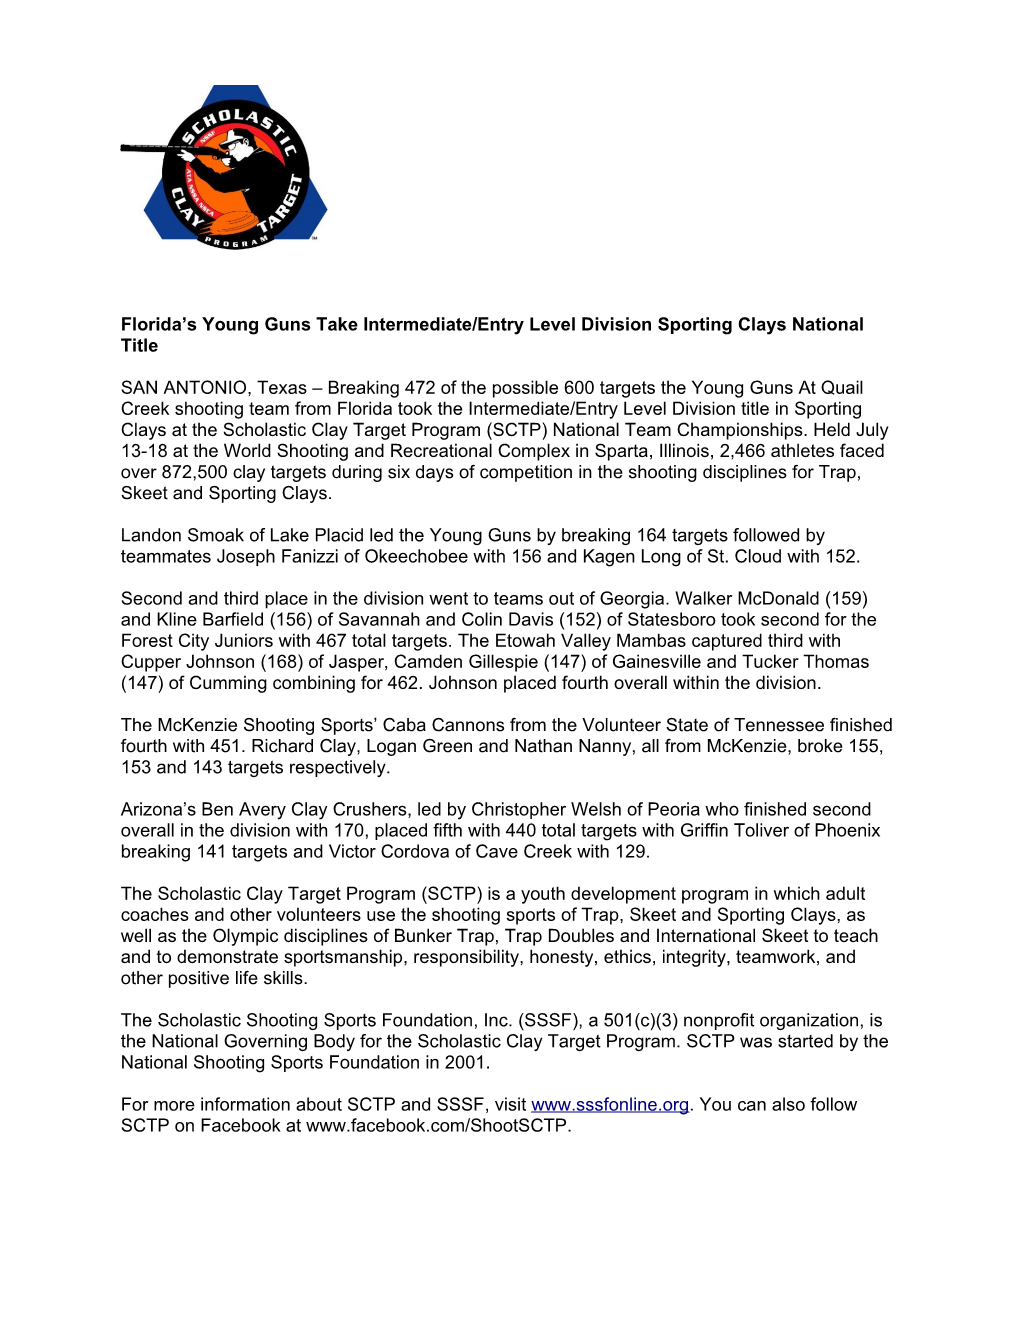 Florida S Young Guns Takeintermediate/Entry Level Division Sporting Clays National Title